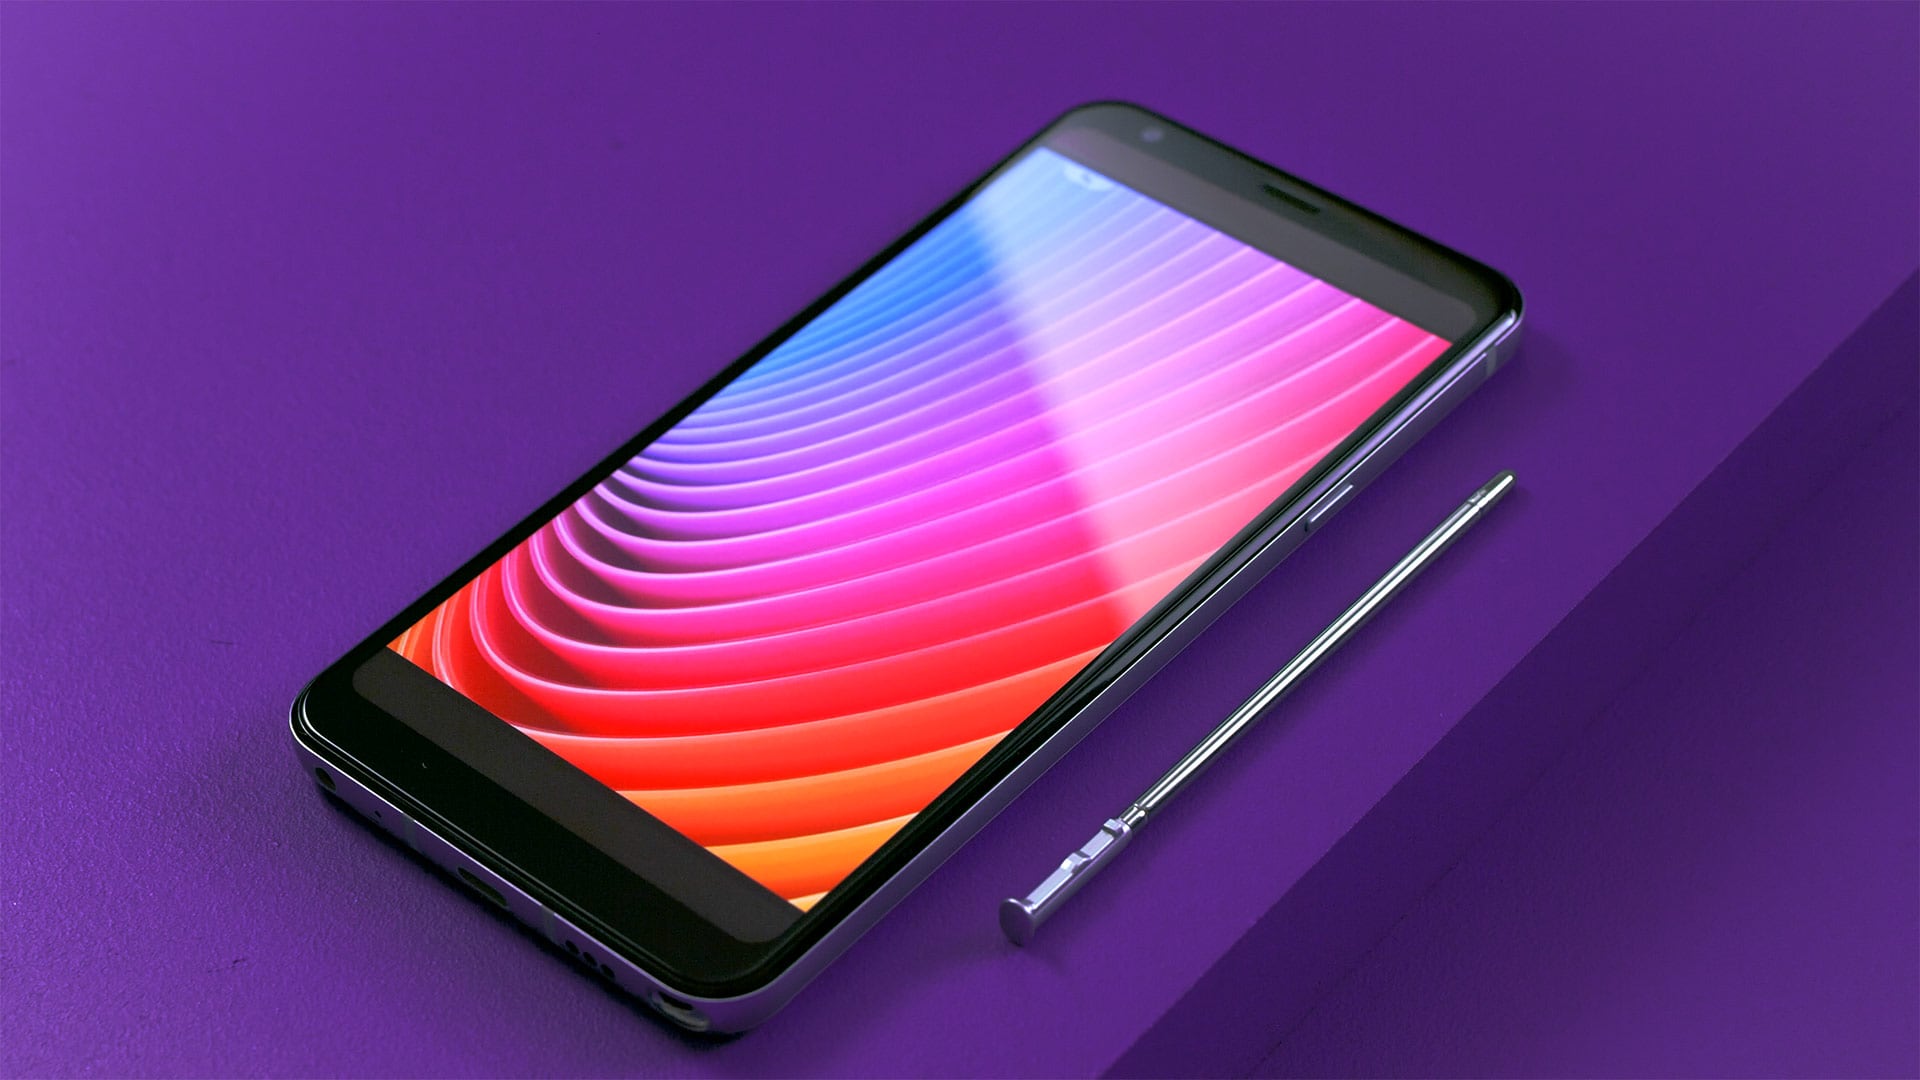 A art directed hero shot of a LG smartphone in a product promo video